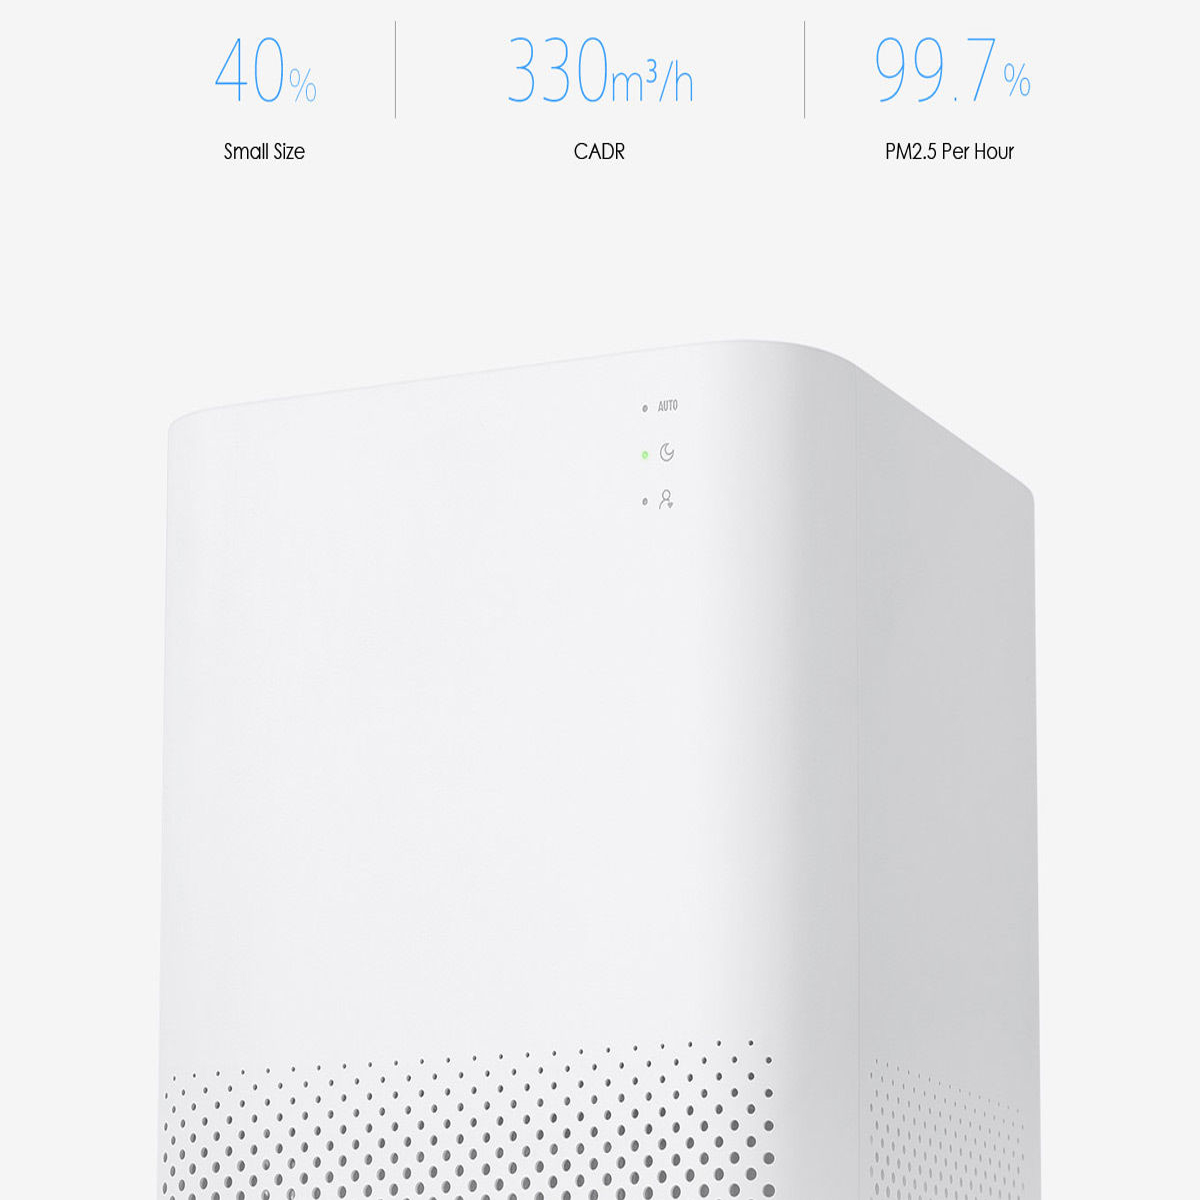 Xiaomi Mi Air Purifier 2 Sterilizer Addition to Formaldehyde Purifiers Air Cleaning Intelligent Household Hepa Filter with APP Remote Control